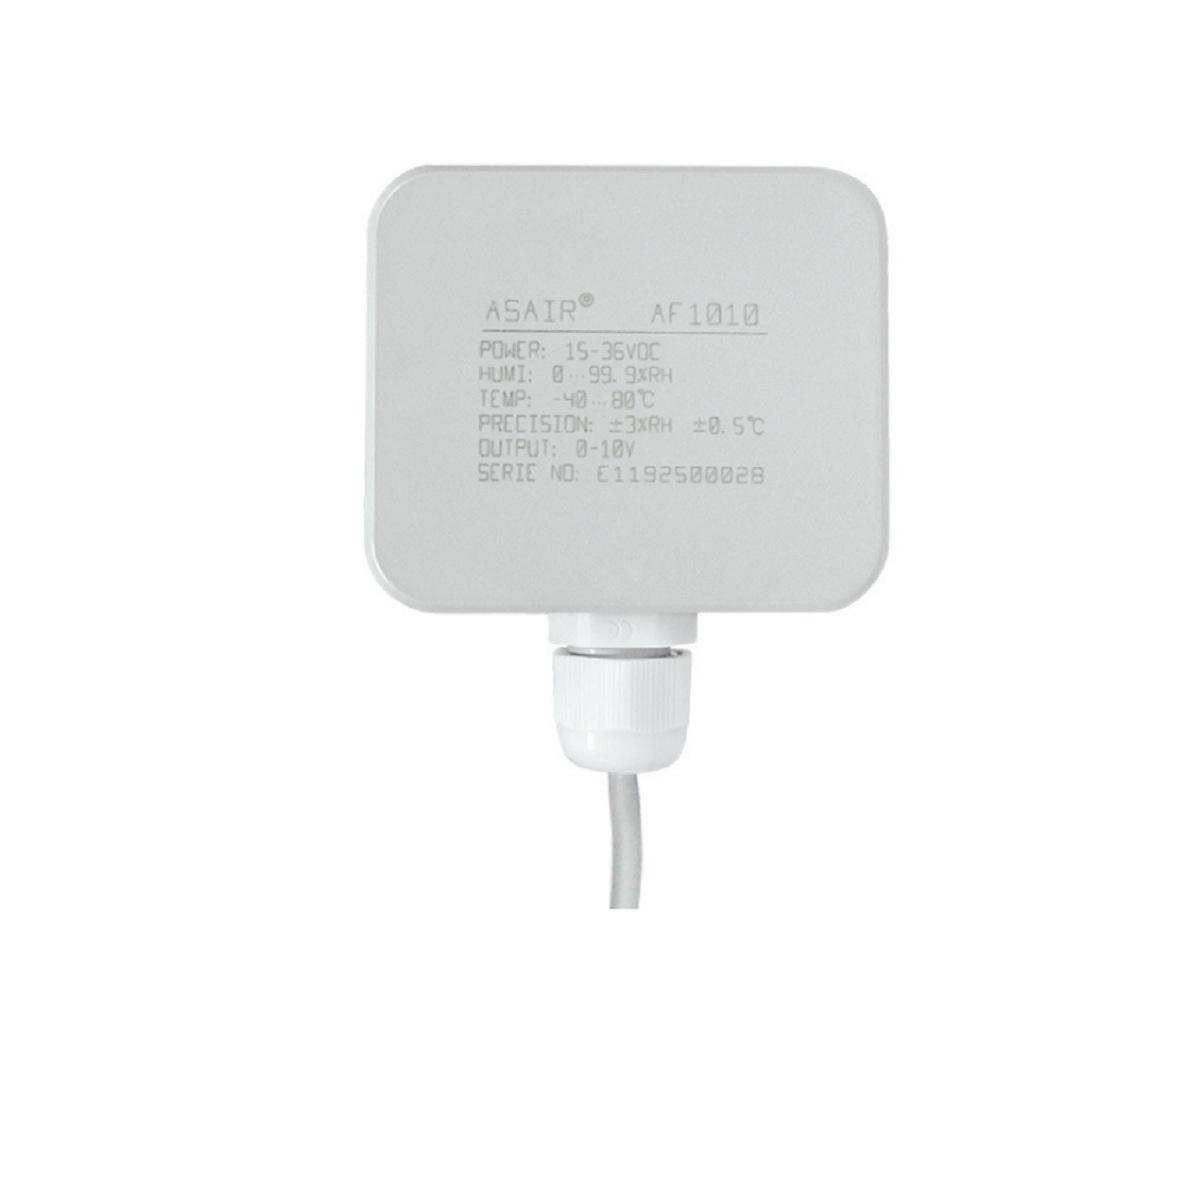 AF1010-Pipe-type-Voltage-type-Temperature-and-Humidity-Transmitter-Anti-chemical-Pollution-of-Dust-p-1557268-3